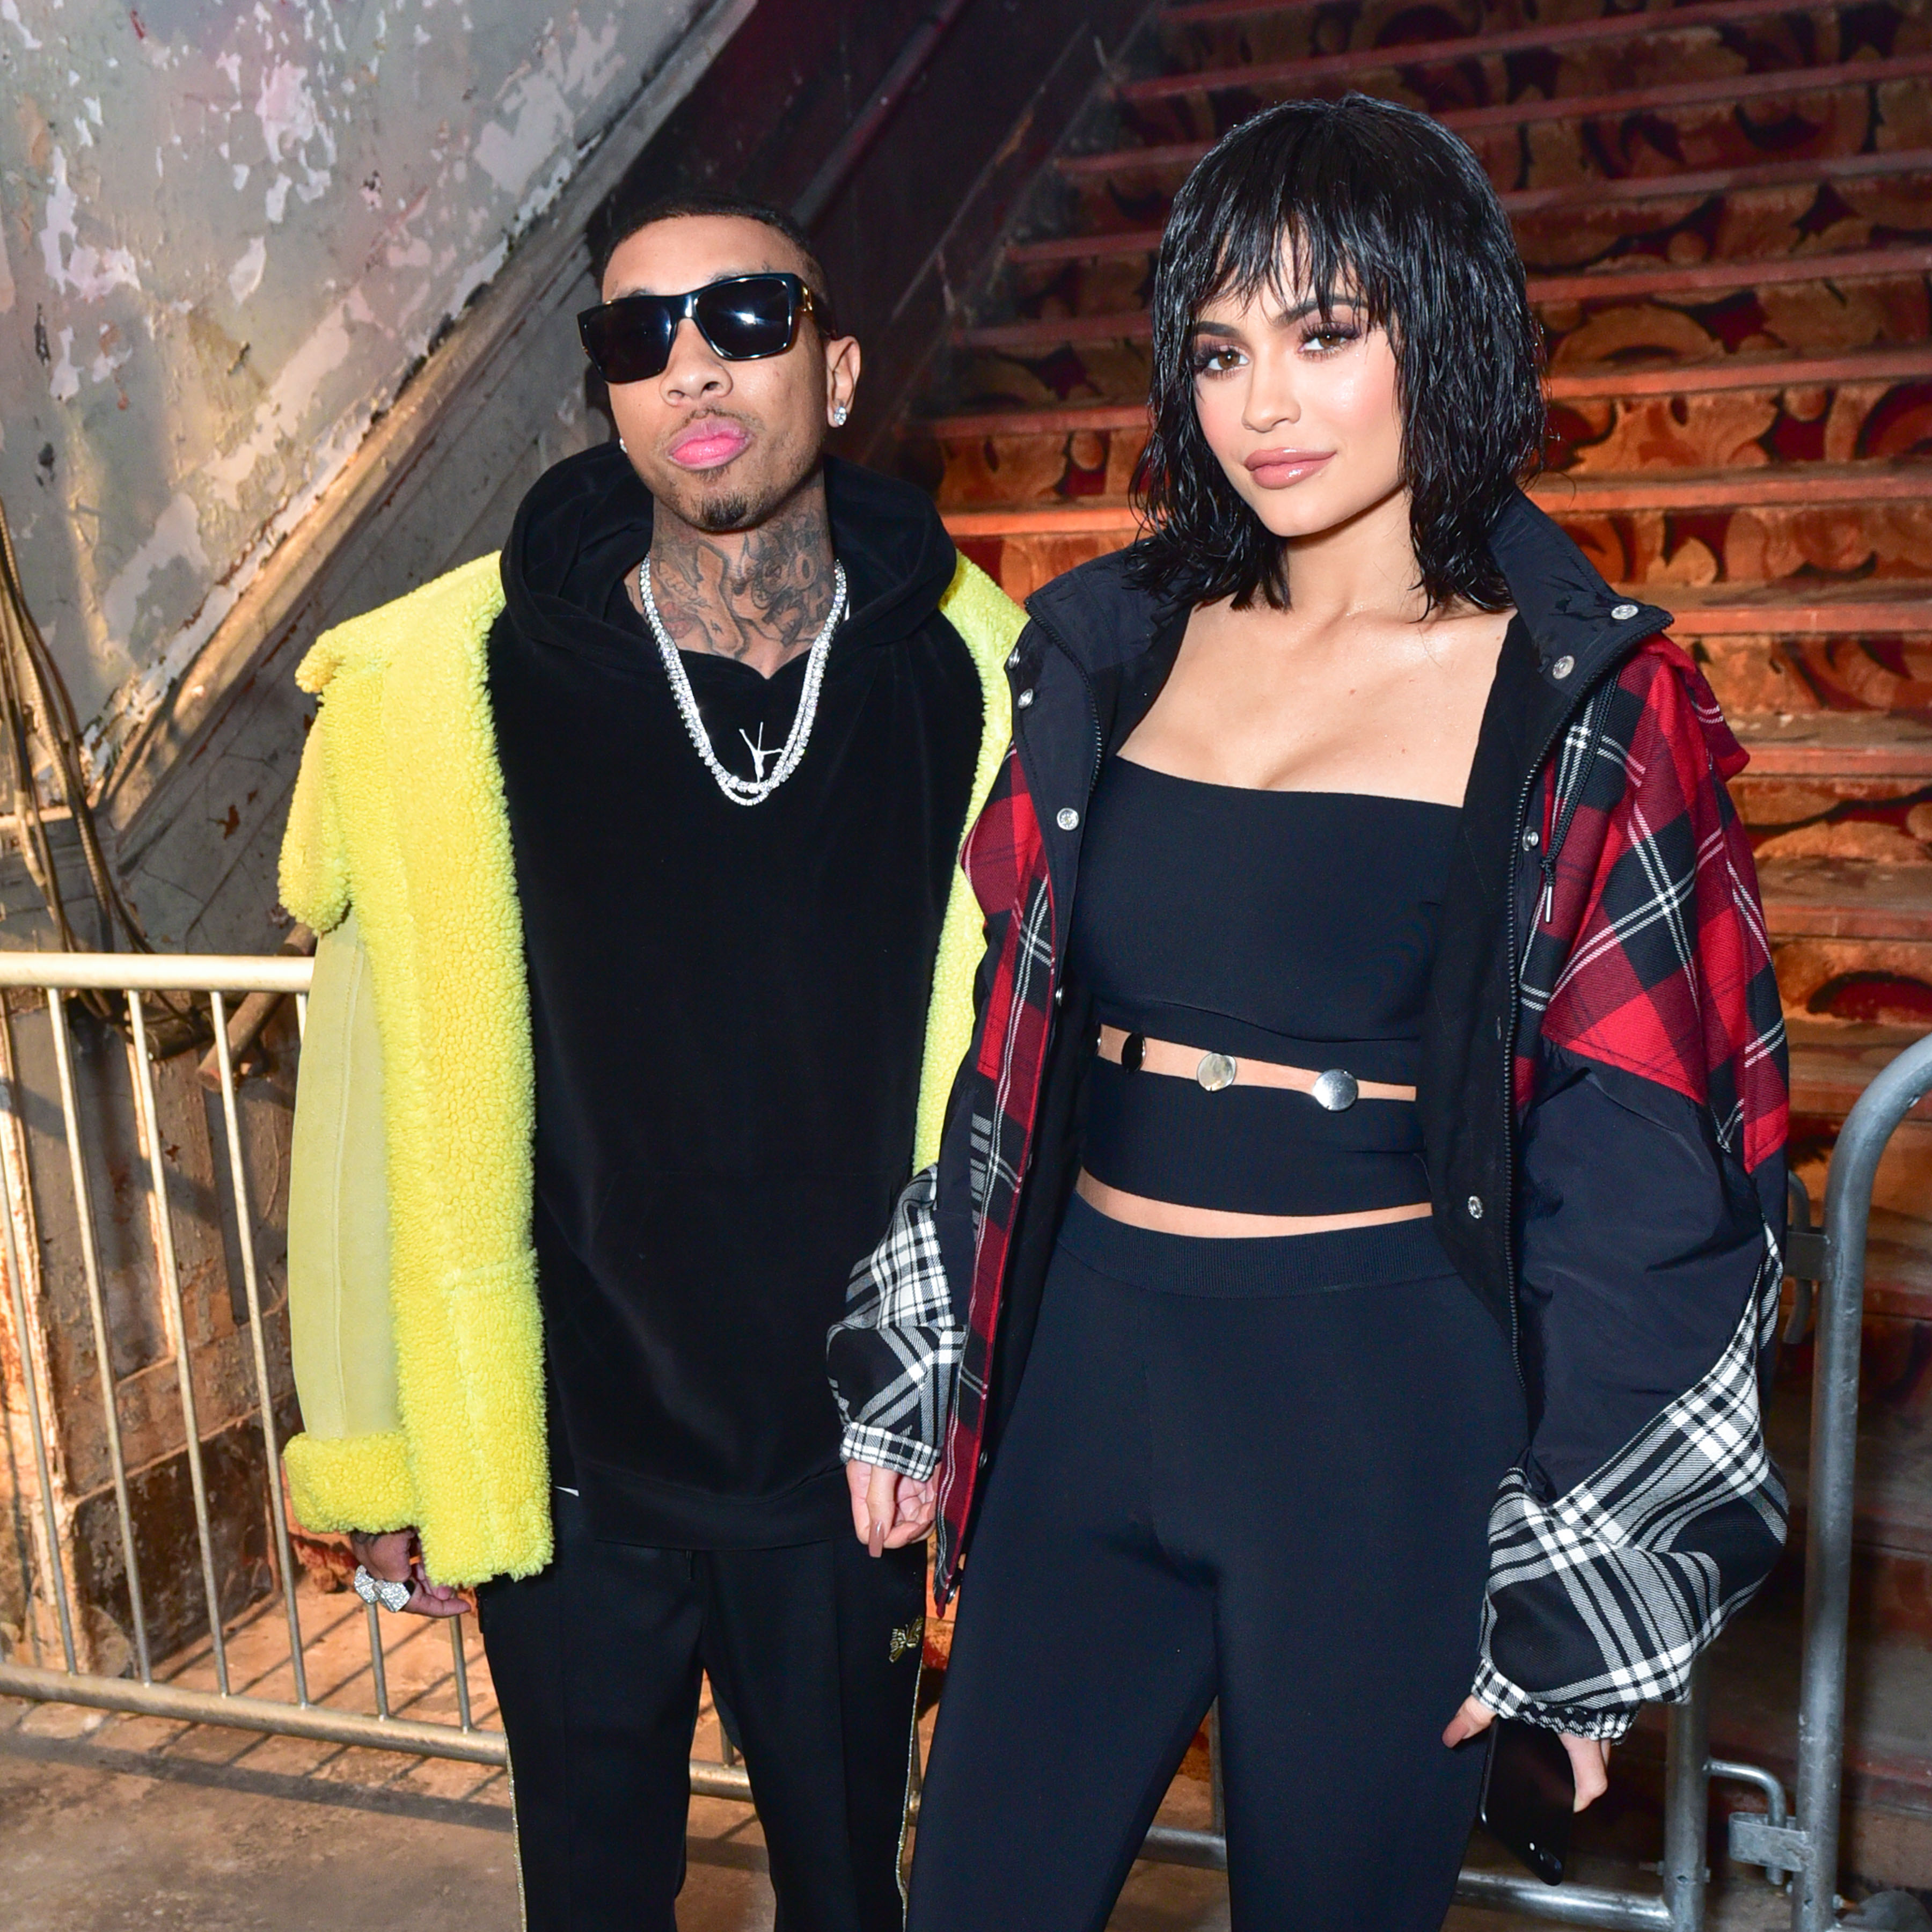 Khloe and Tyga were Hollywood's It couple when they were together from 2015 to 2017